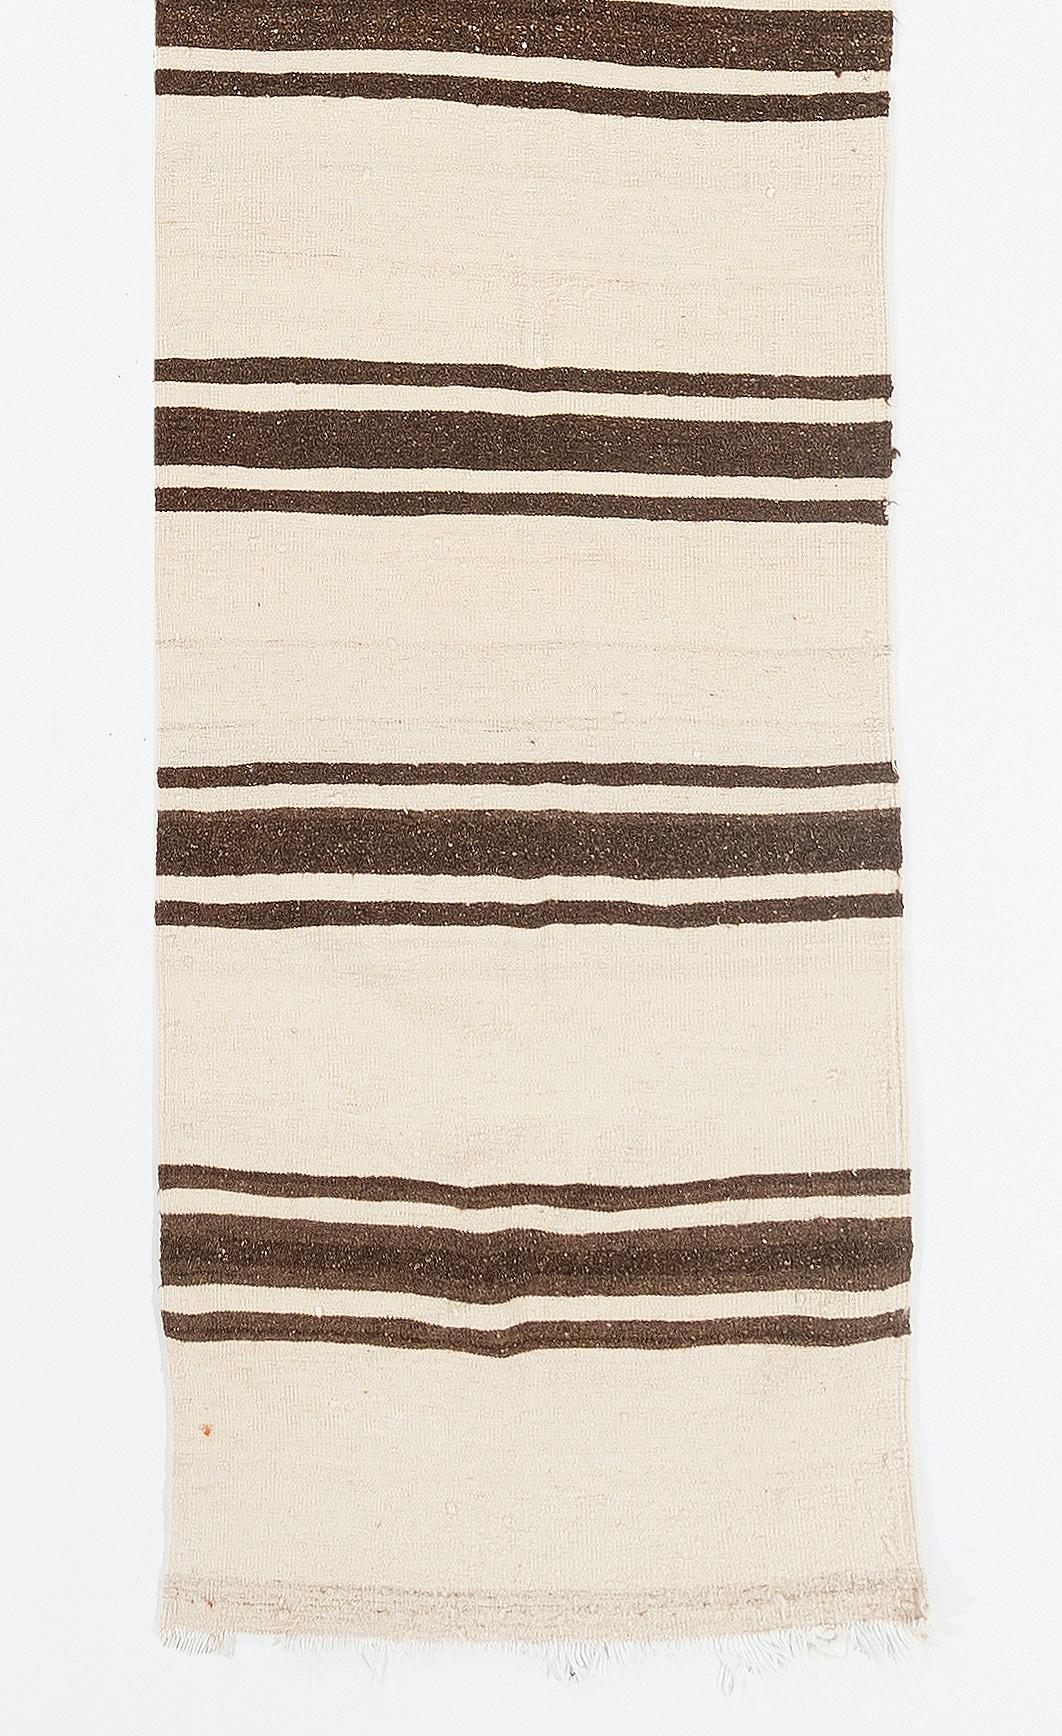 Hand-Woven 2.4x15 Ft Handmade Vintage Striped Kilim Runner Made of Natural Un-Dyed Wool For Sale